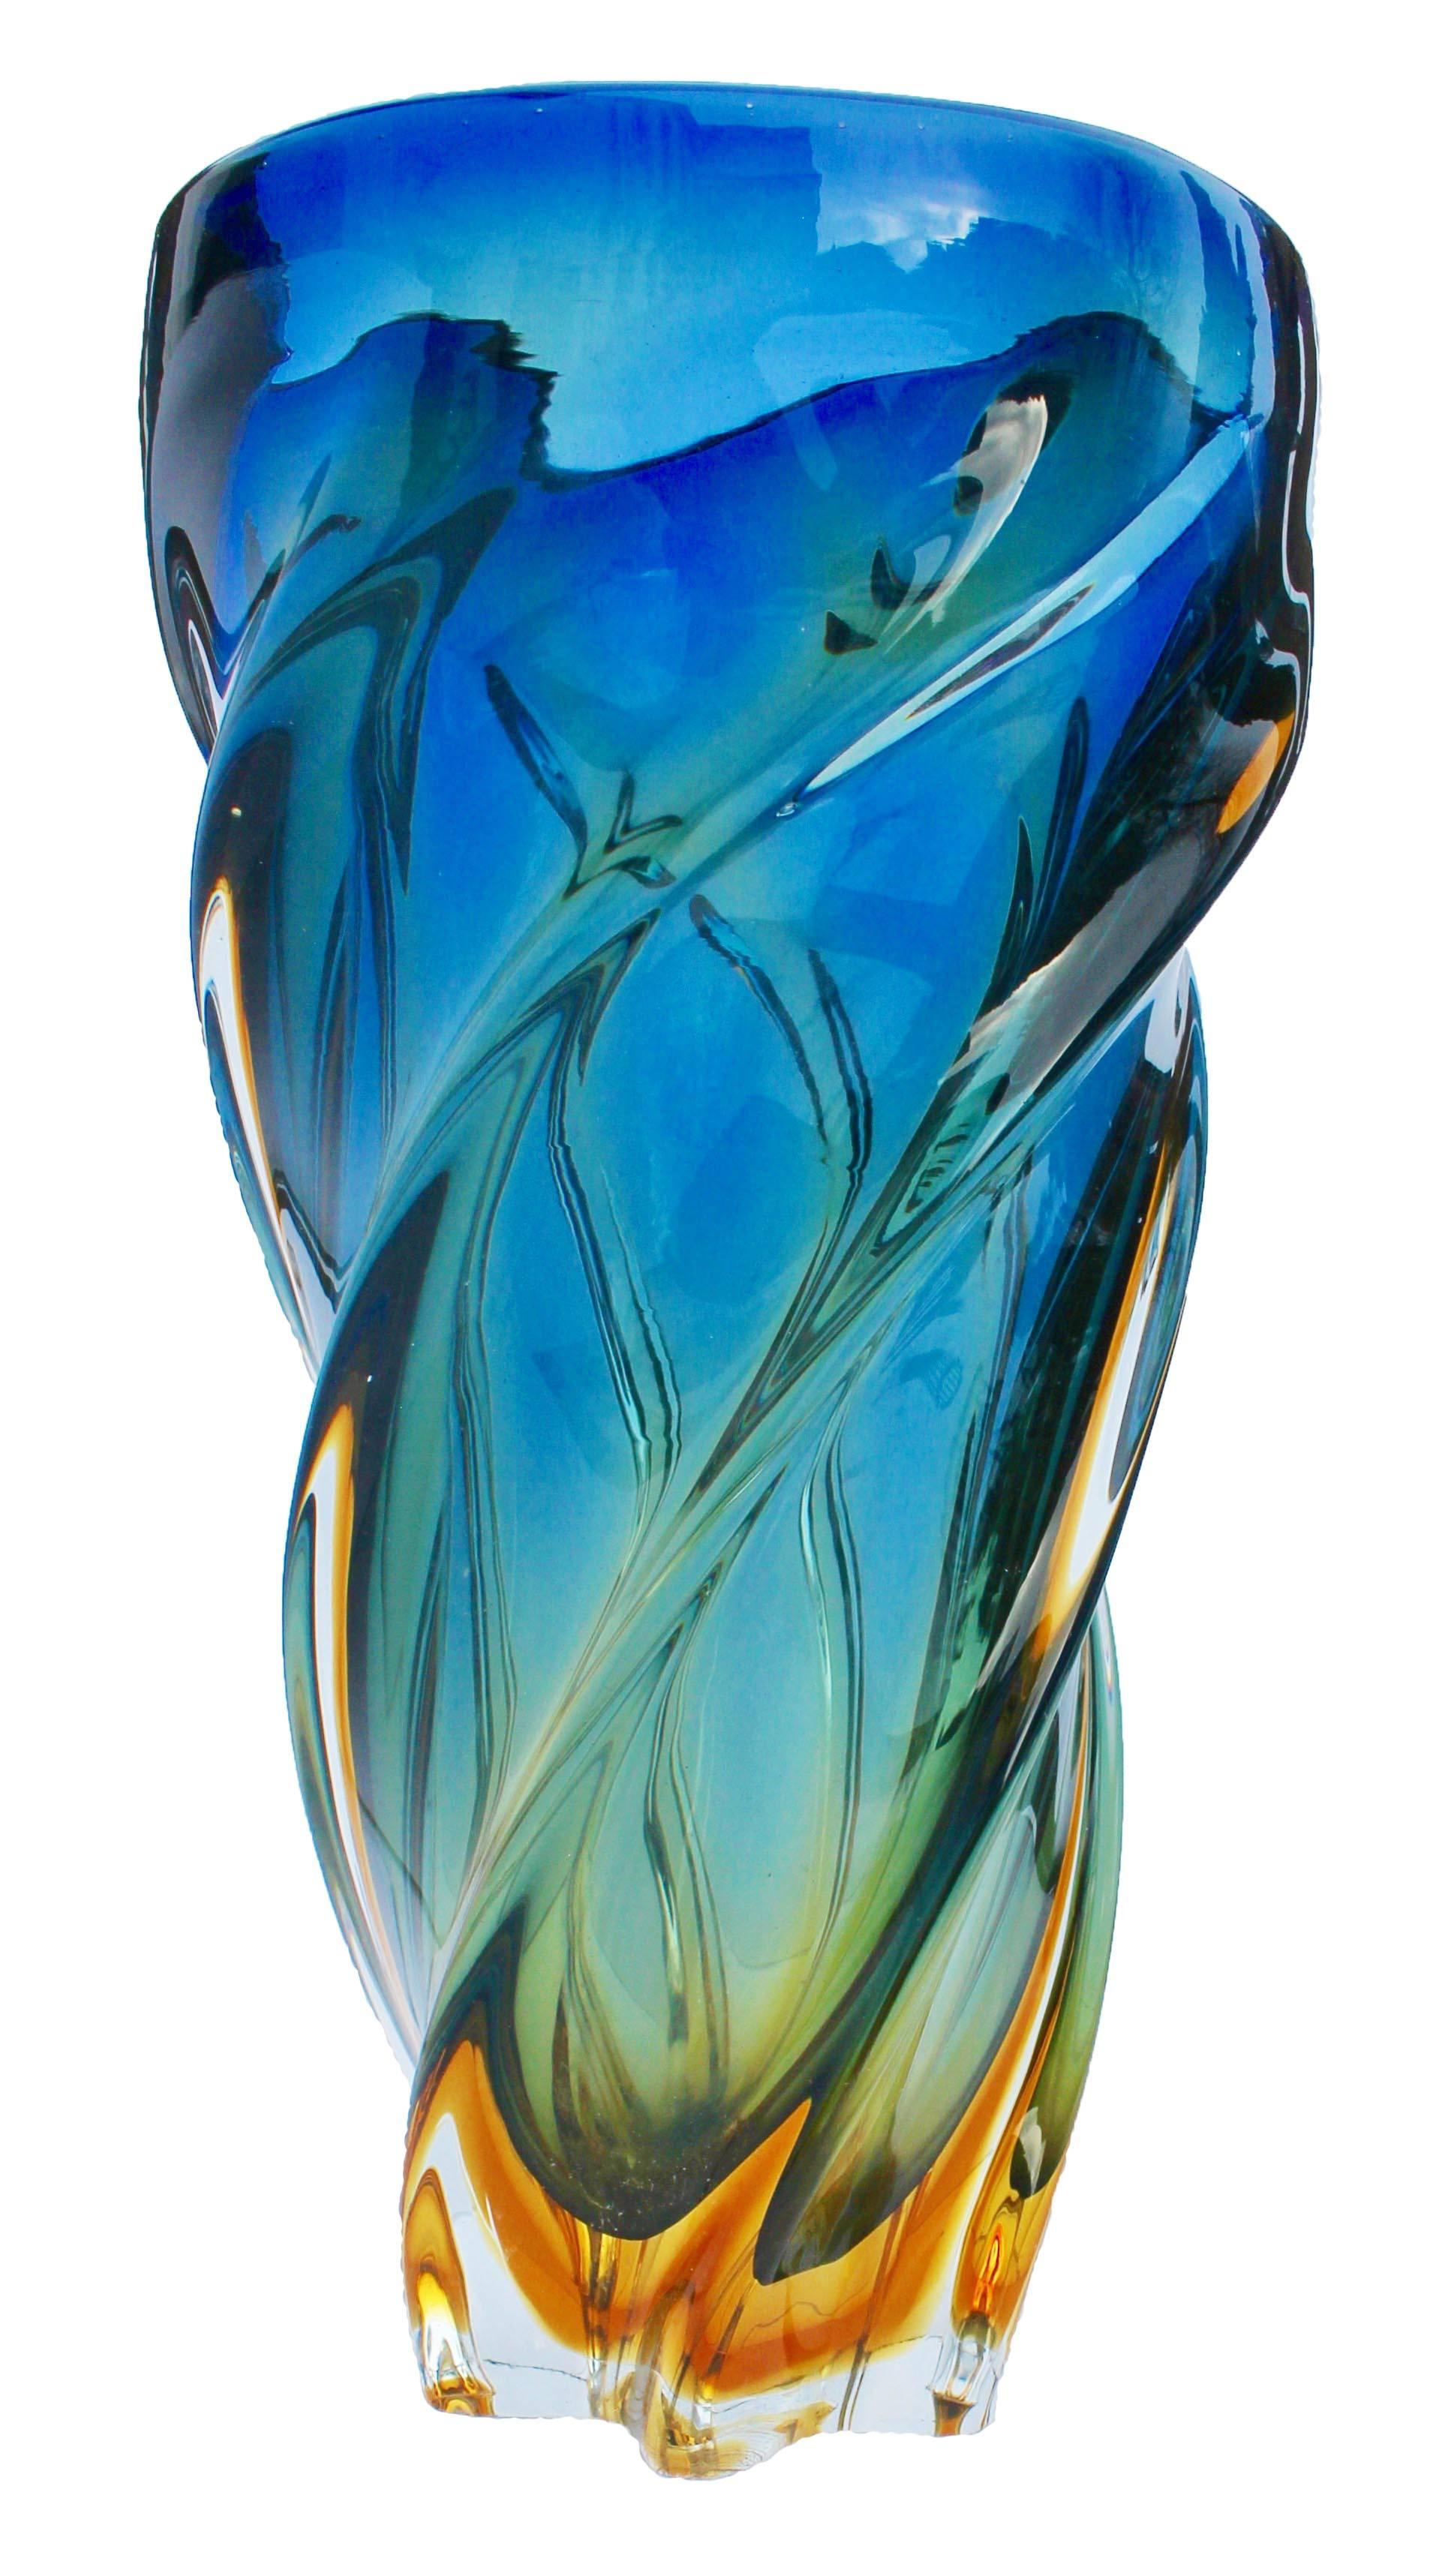 Mid-Century Modern Set Murano Glass Bowls with Folded Edges, Color Blue and Yellow